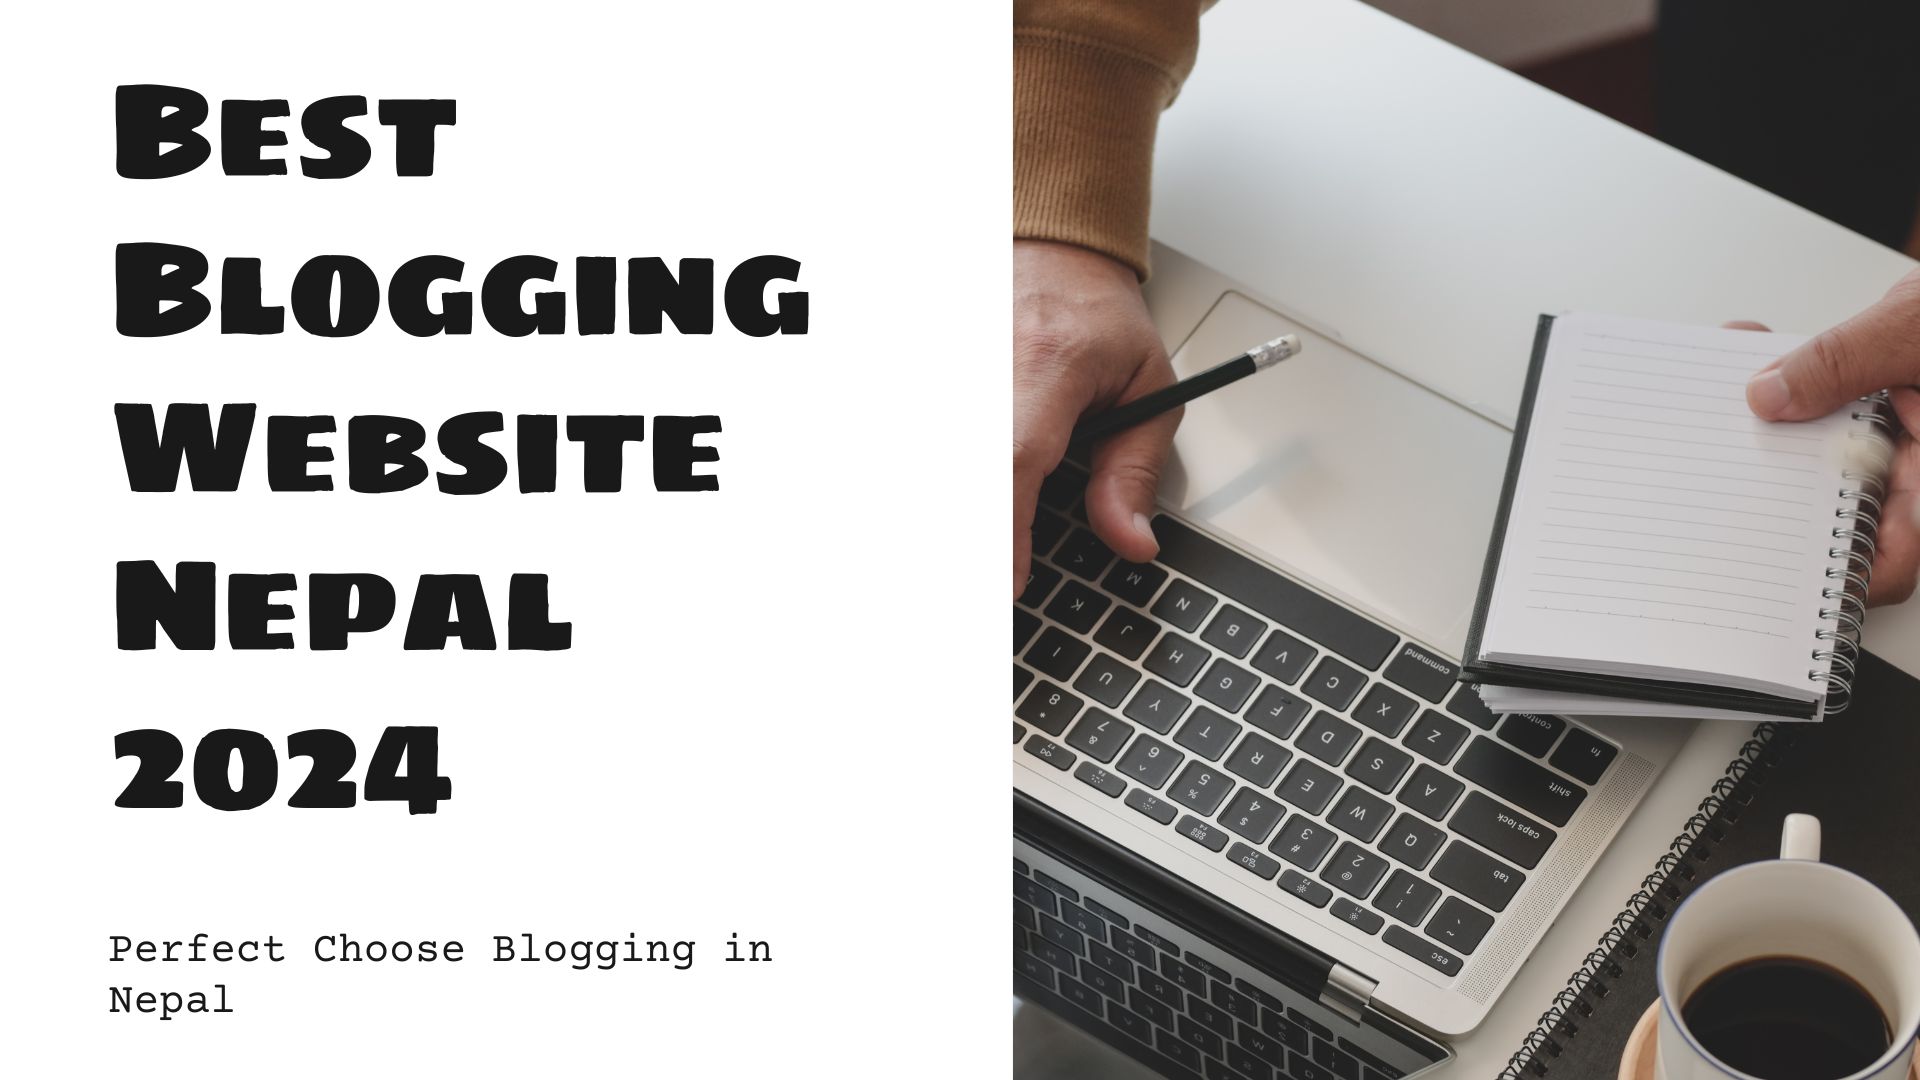 Which Blogging Website in Nepal do you like Best in 2024